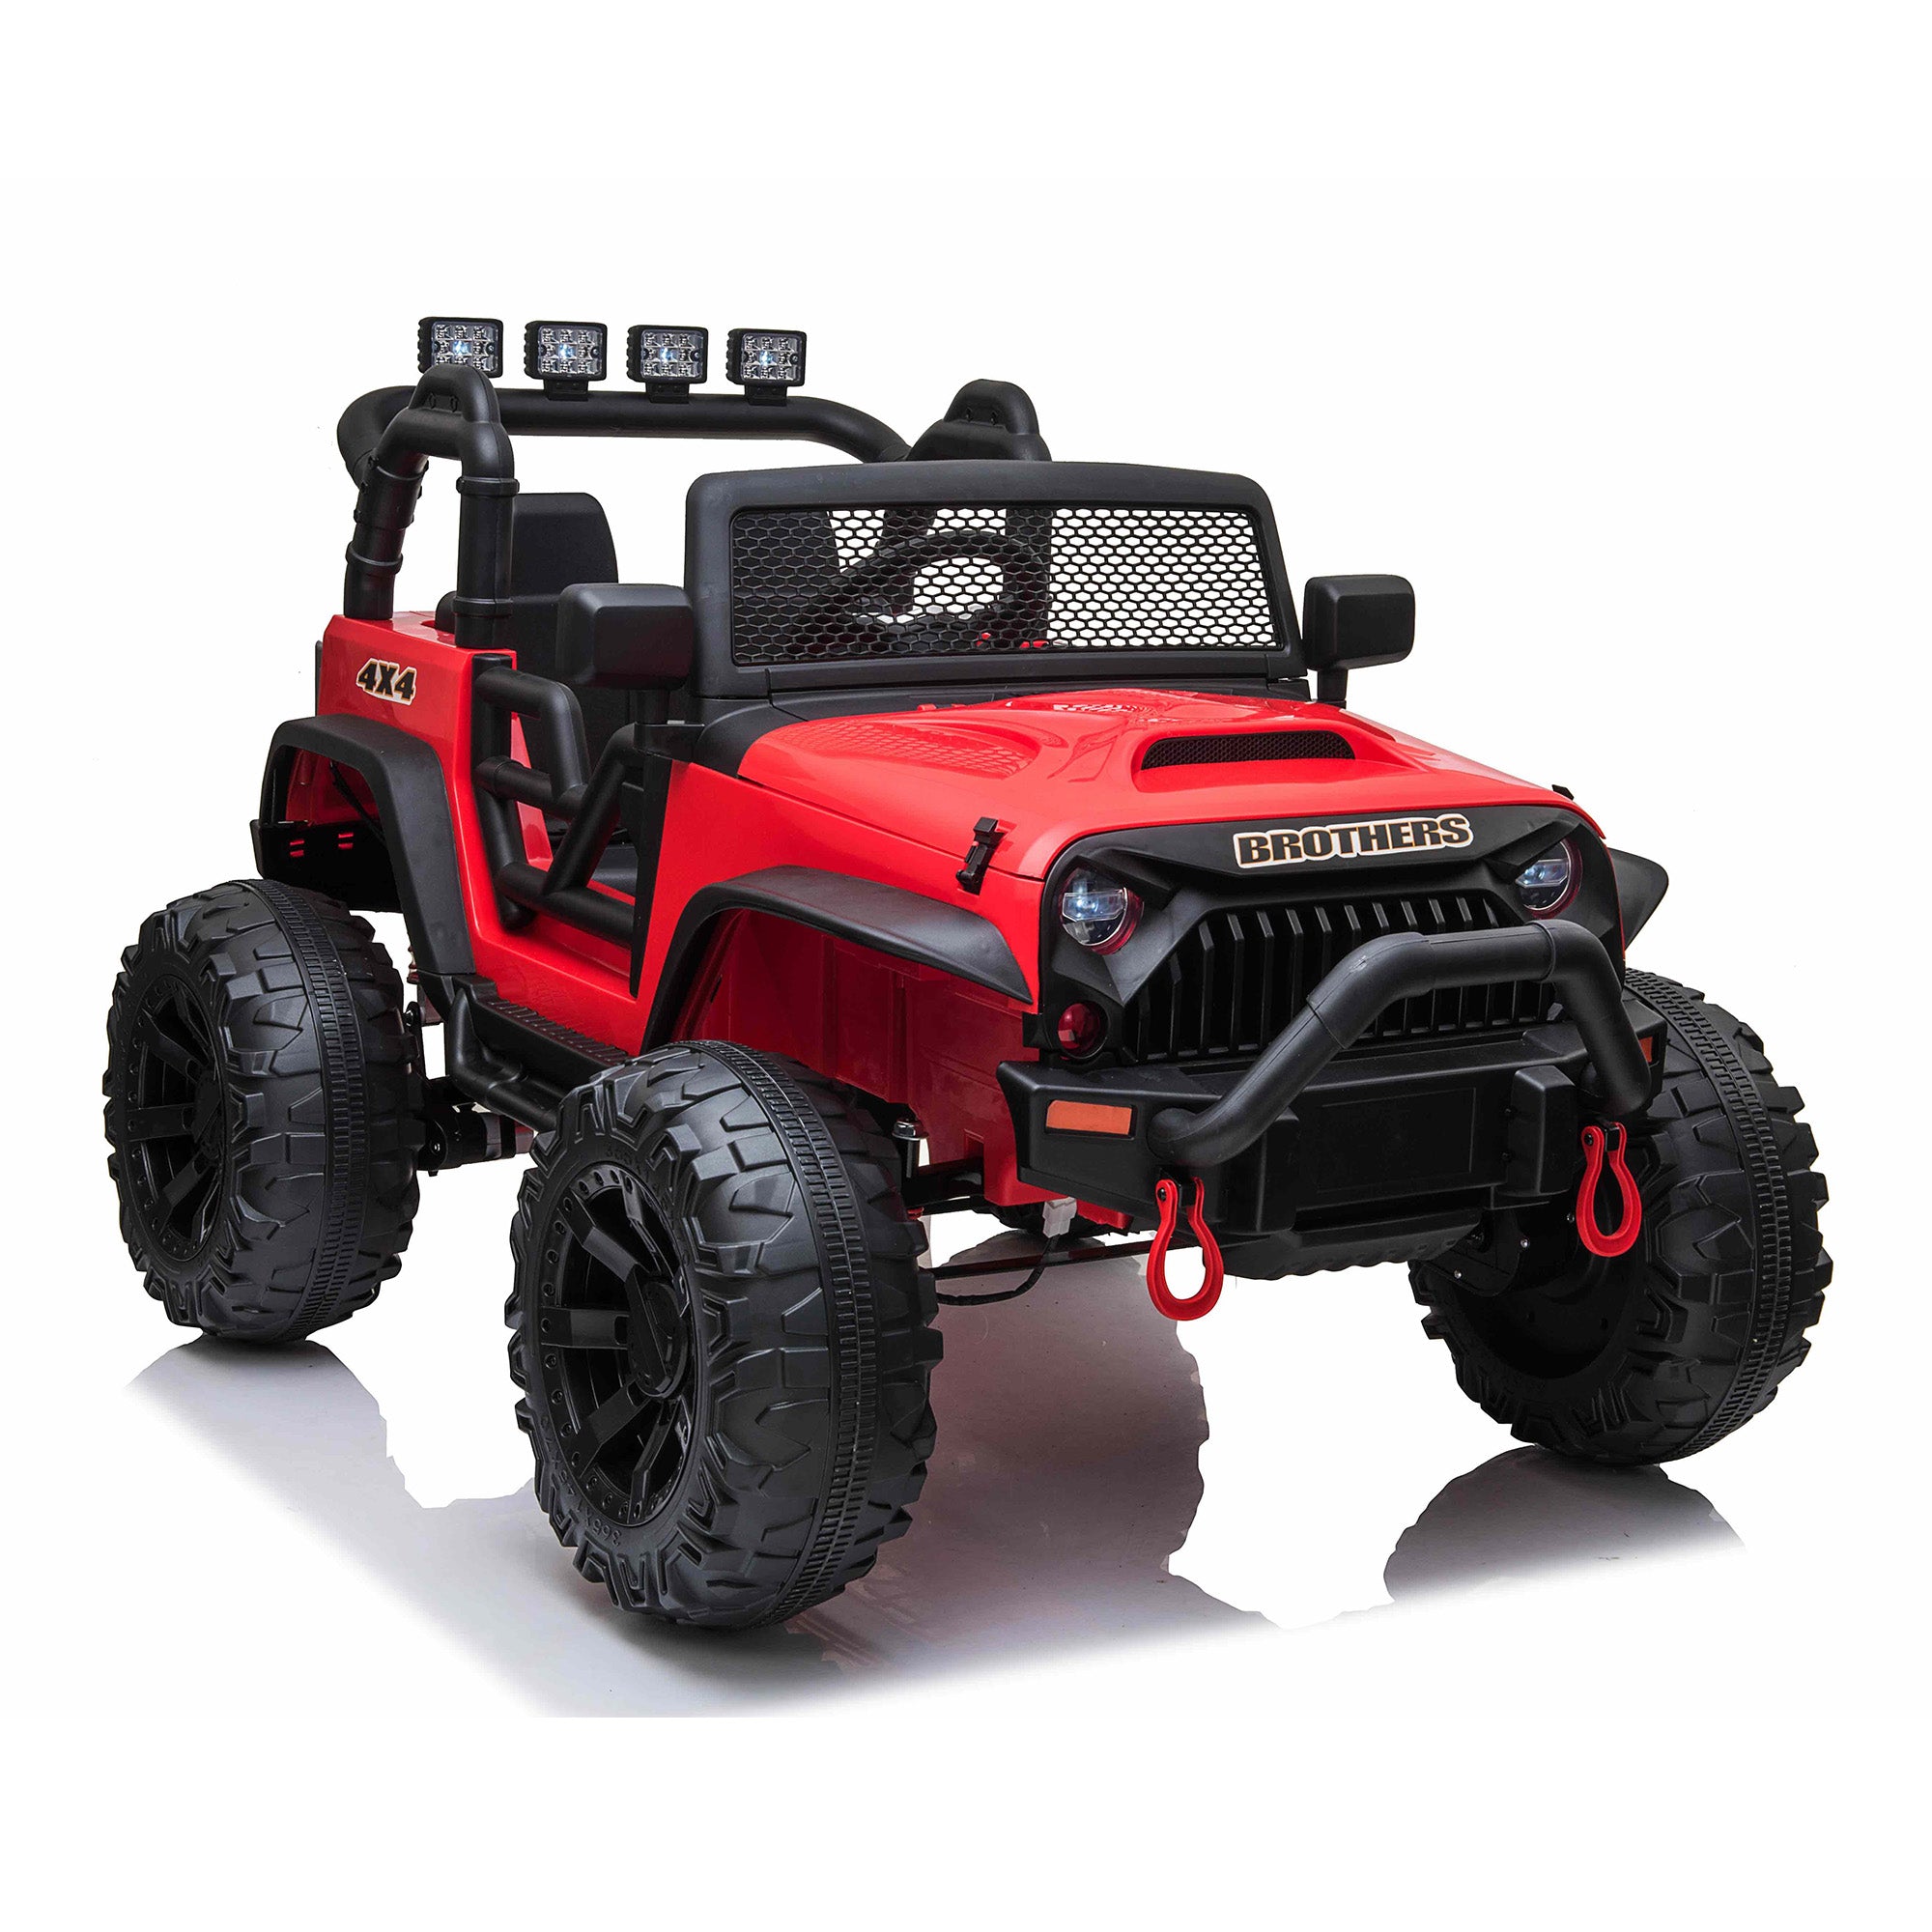 kids-24v-jeep-wrangler-style-off-road-electric-ride-on-car-19.jpg